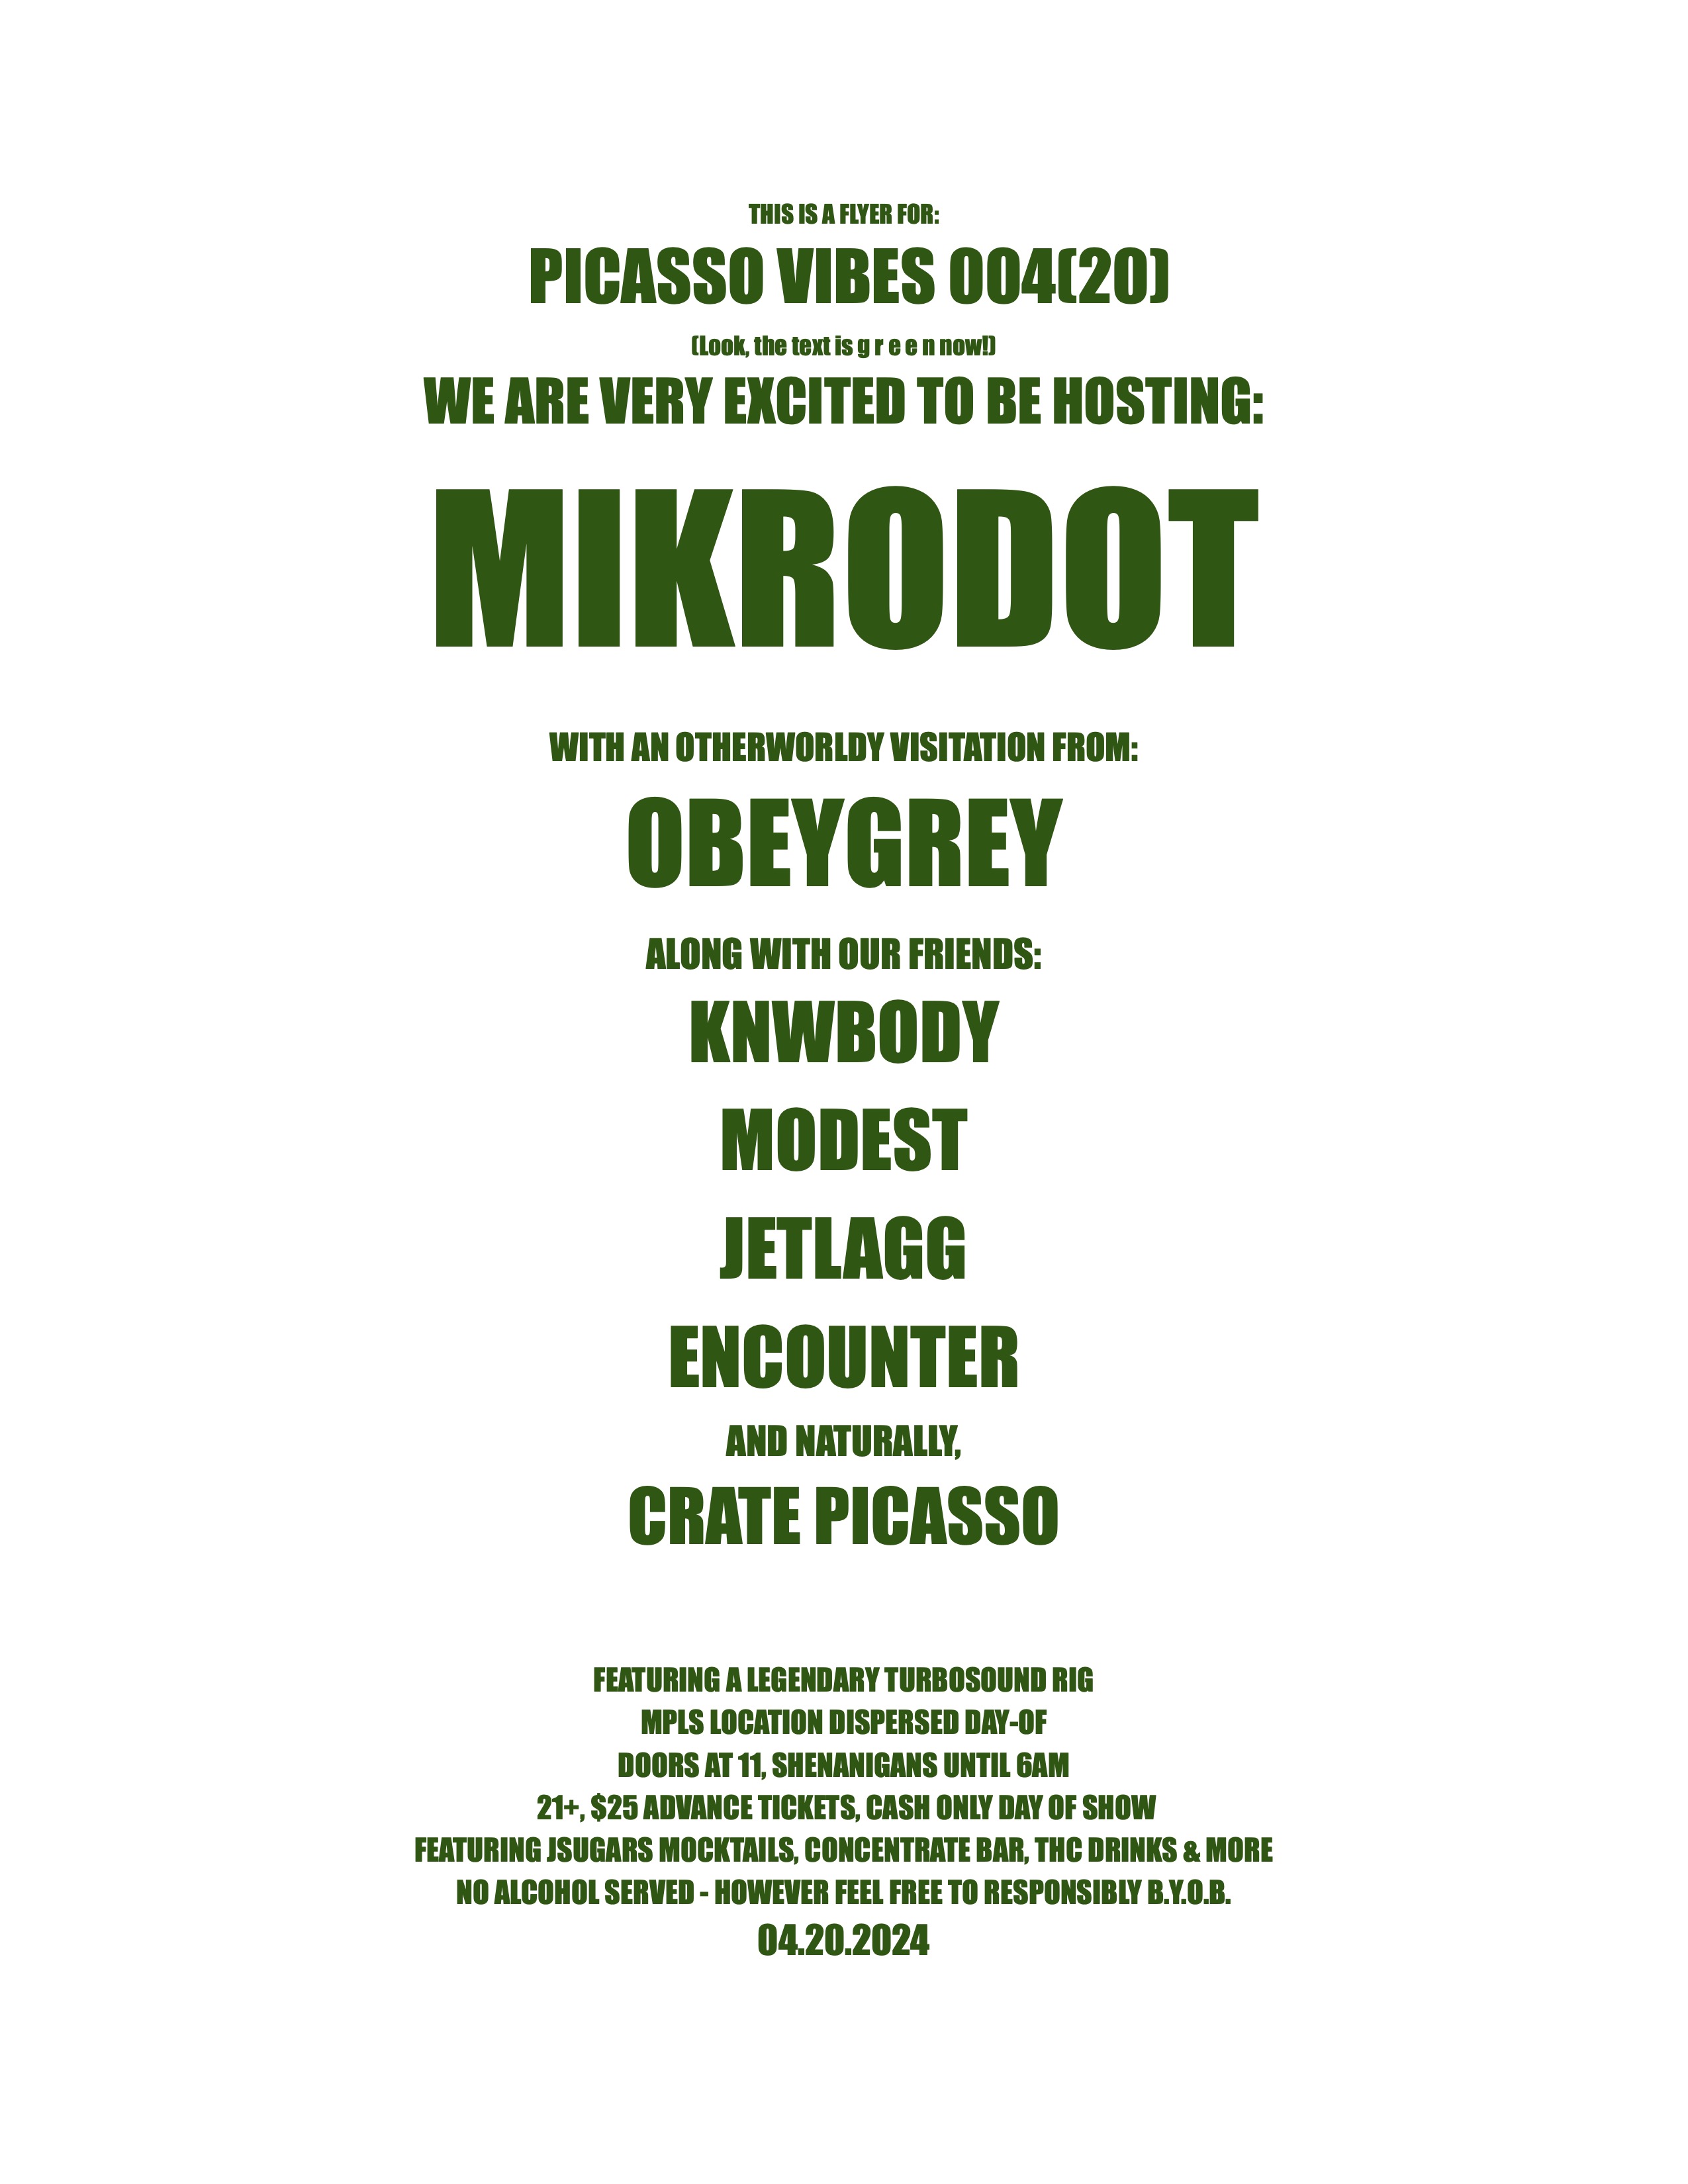 PICASSO VIBES 004(20): MIKRODOT